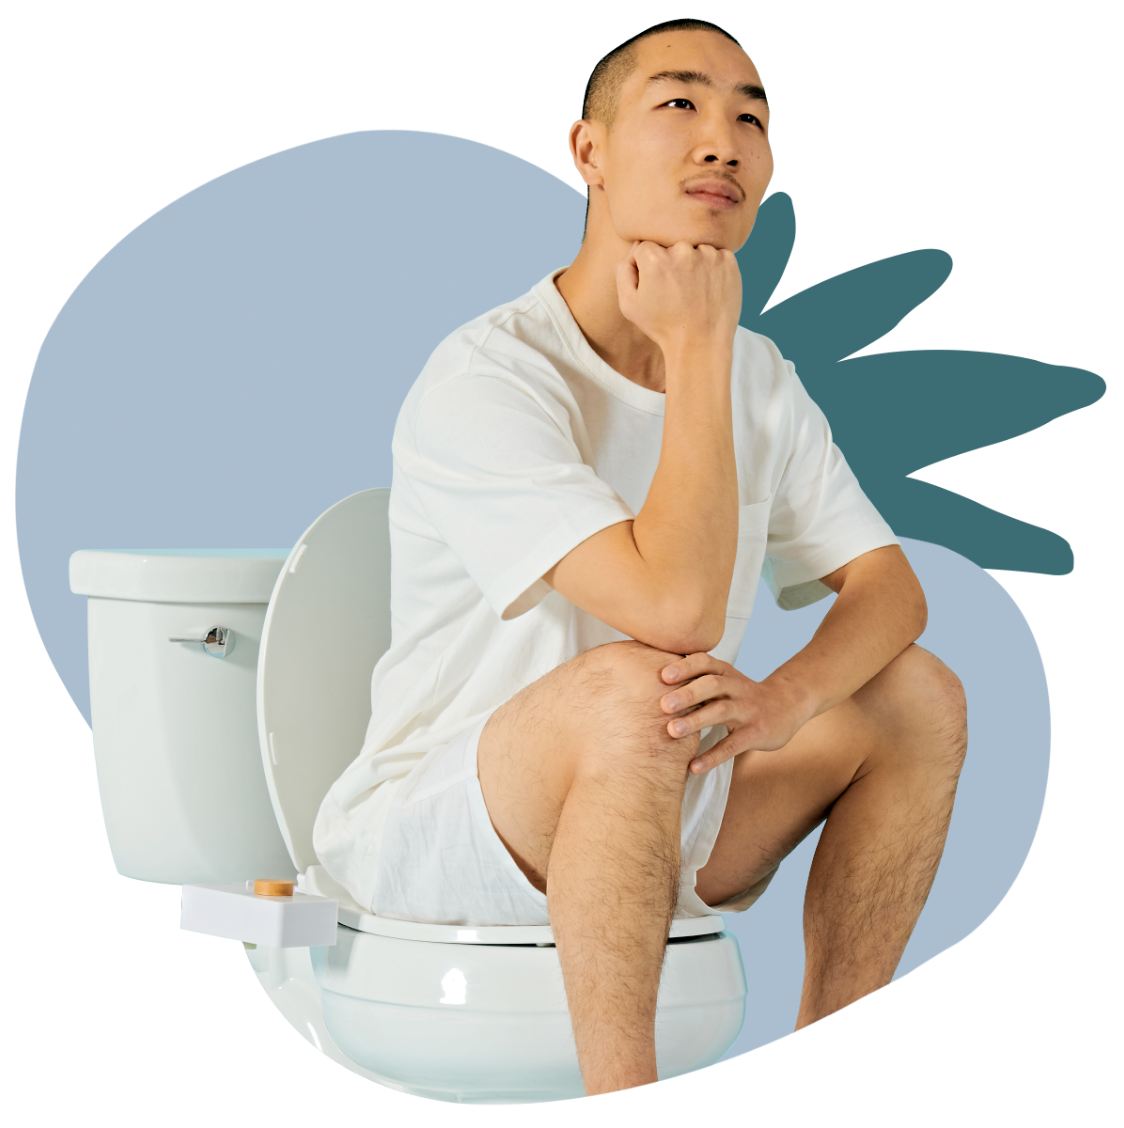 How to Use a Bidet: 4 Simple Steps (with Pictures) | TUSHY